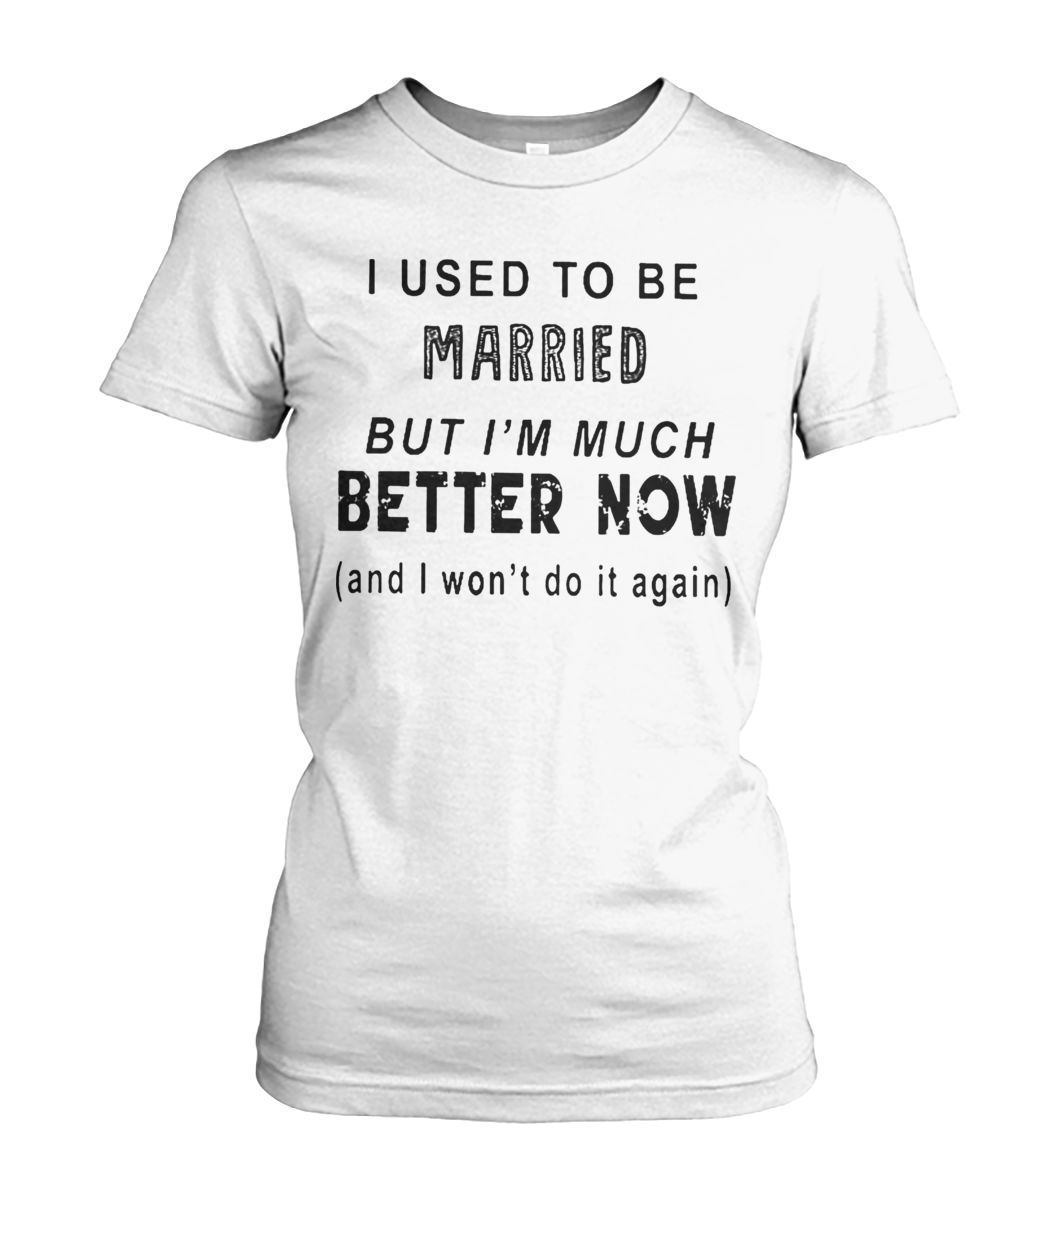 I used to be married but I'm much better now women's crew tee